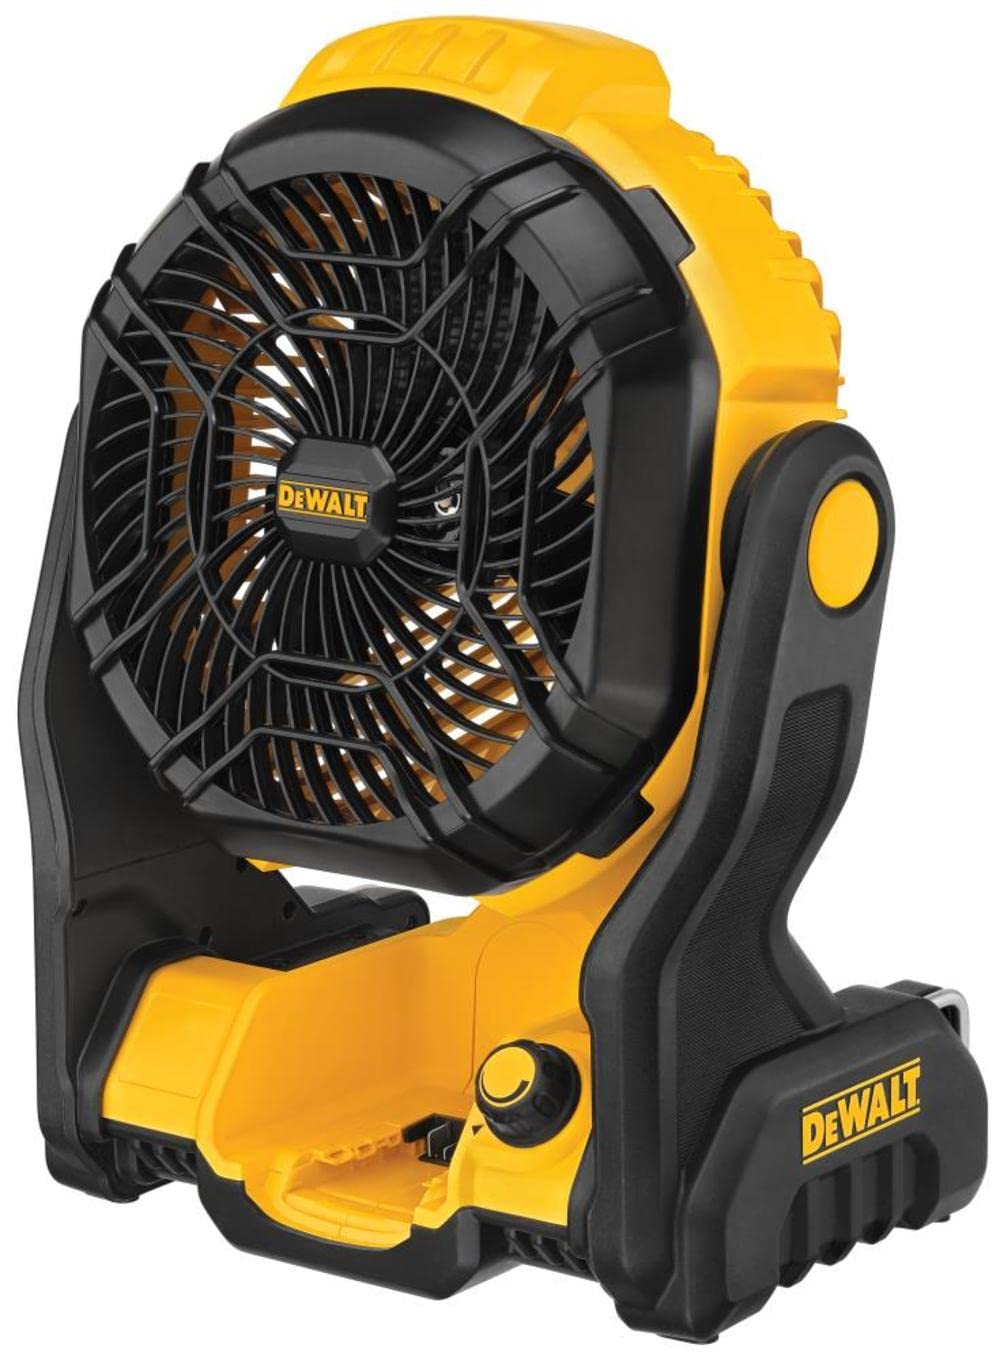 DEWALT 20V MAX Jobsite Fan, Cordless, Portable, Bare Tool Only (DCE512B), 12x8x14 inches, Yellow/Black $129.99